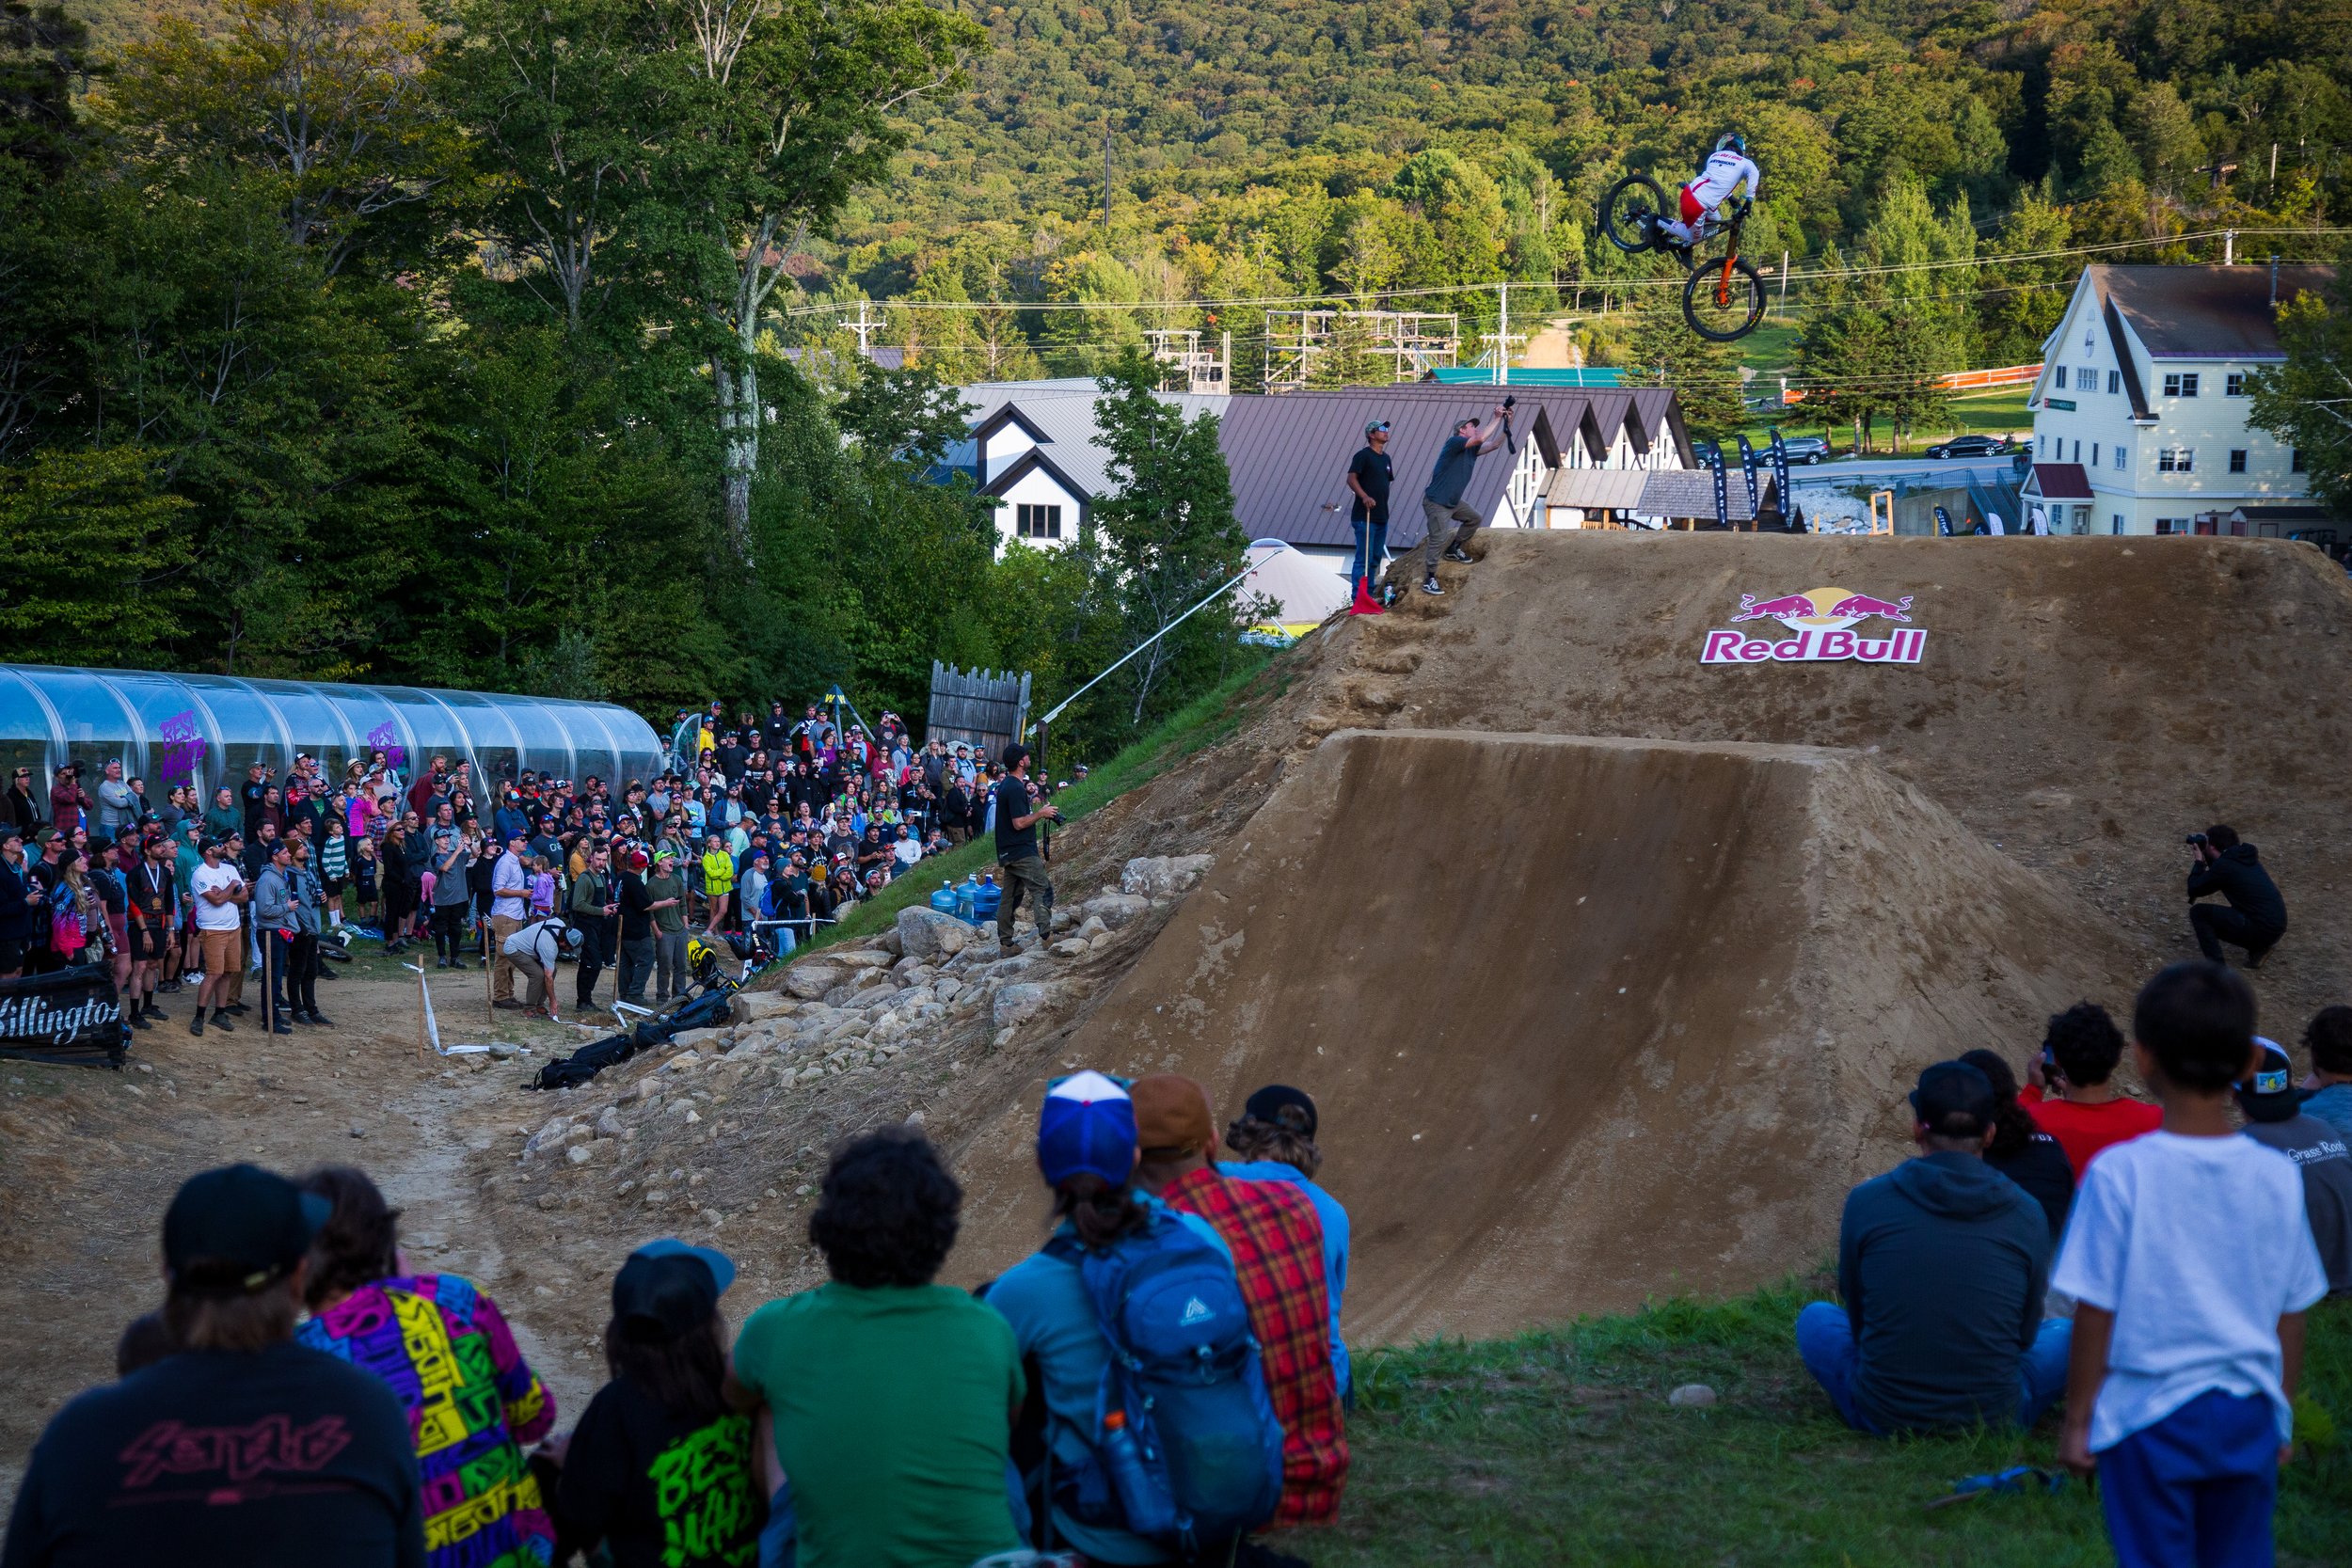 Jackson Goldstone competing in the Red Bull Best Whip during the 2022 US OPEN at Killington Resort // P: J. Astleford